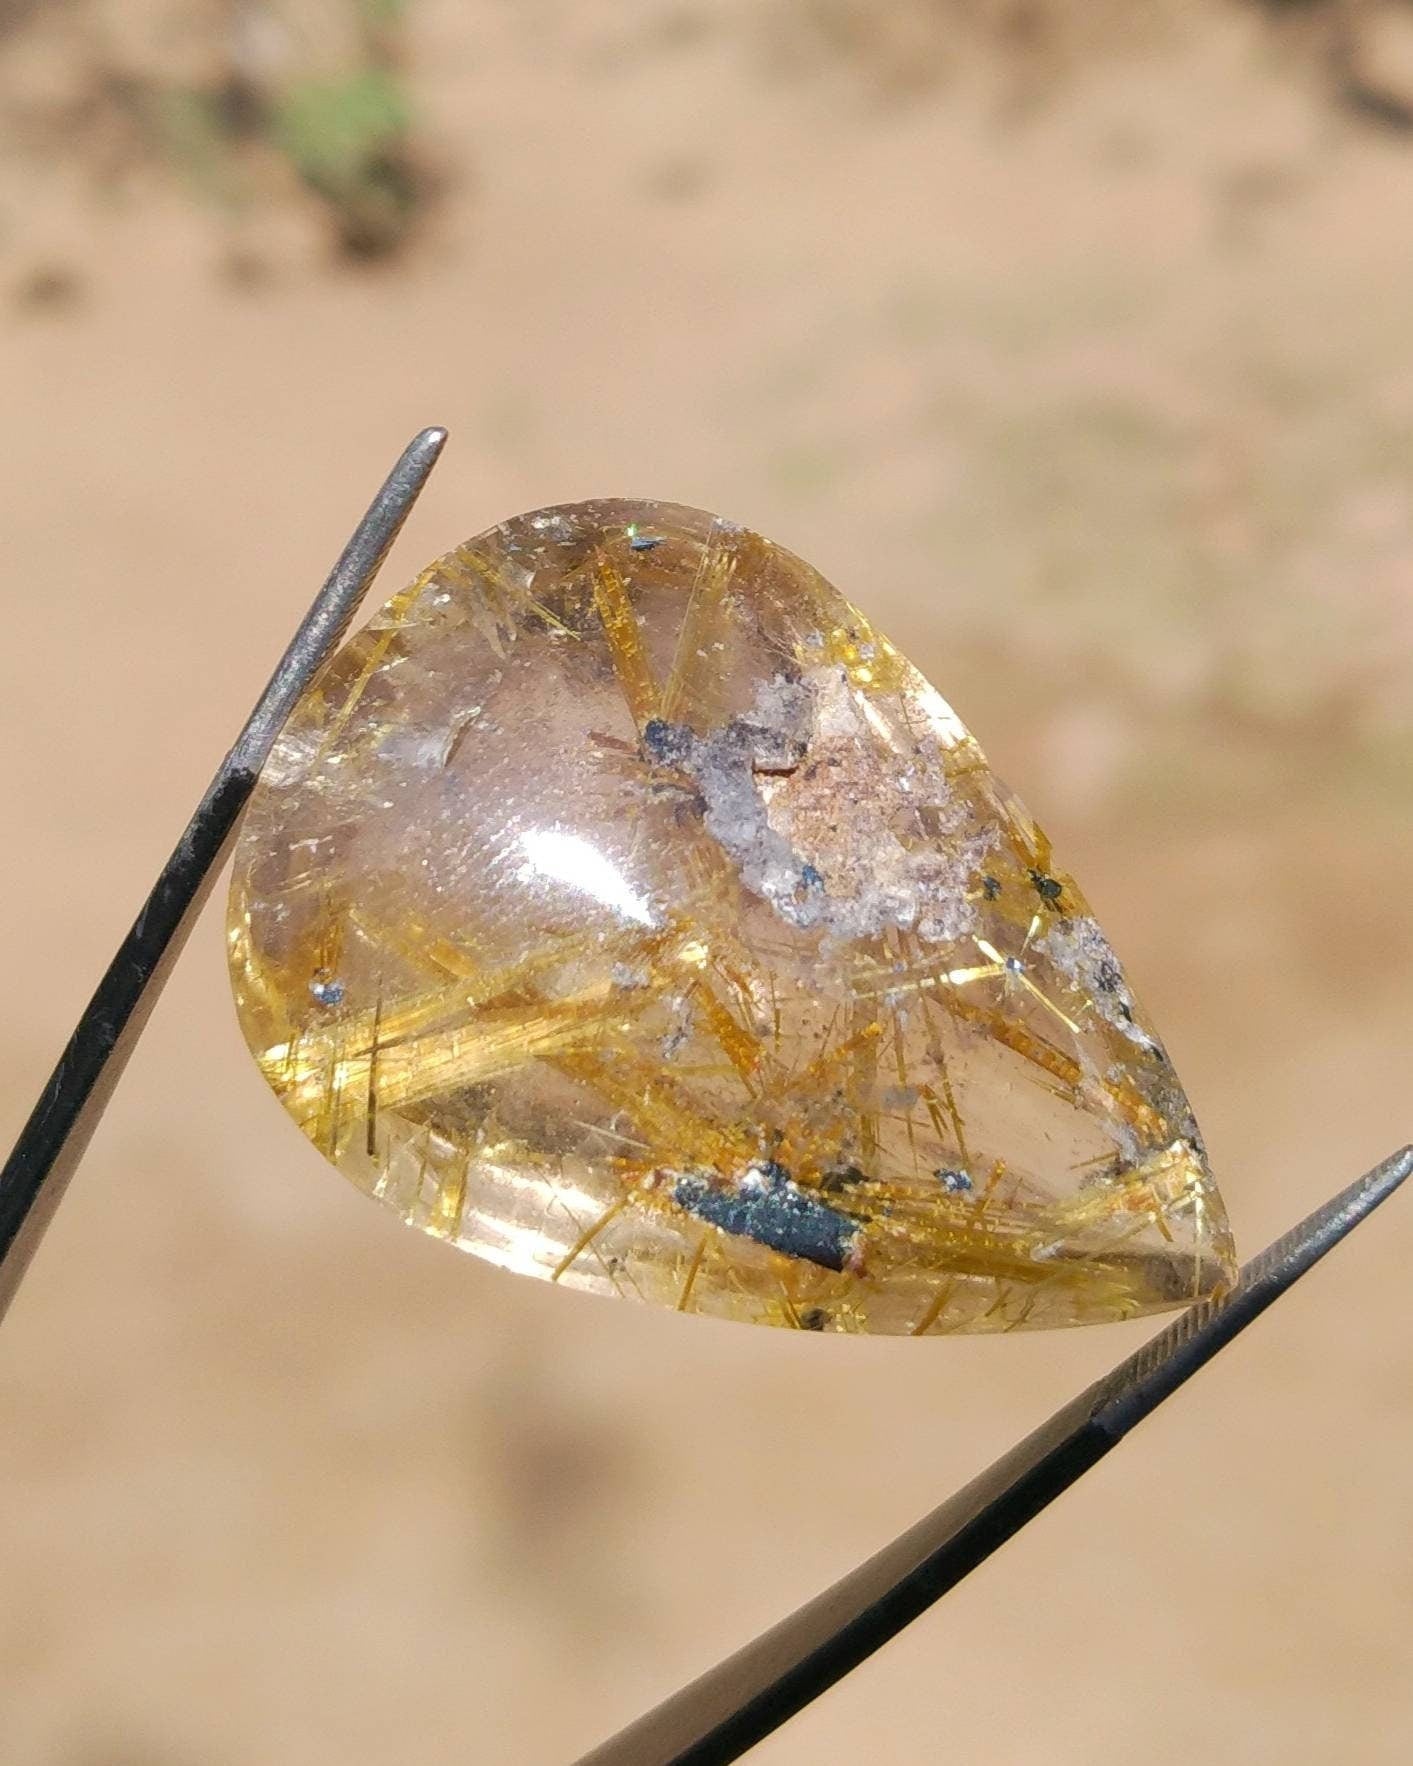 ARSAA GEMS AND MINERALSNatural tip quality beautiful 70 carats golden Rutile included quartz cabochon - Premium  from ARSAA GEMS AND MINERALS - Just $140.00! Shop now at ARSAA GEMS AND MINERALS